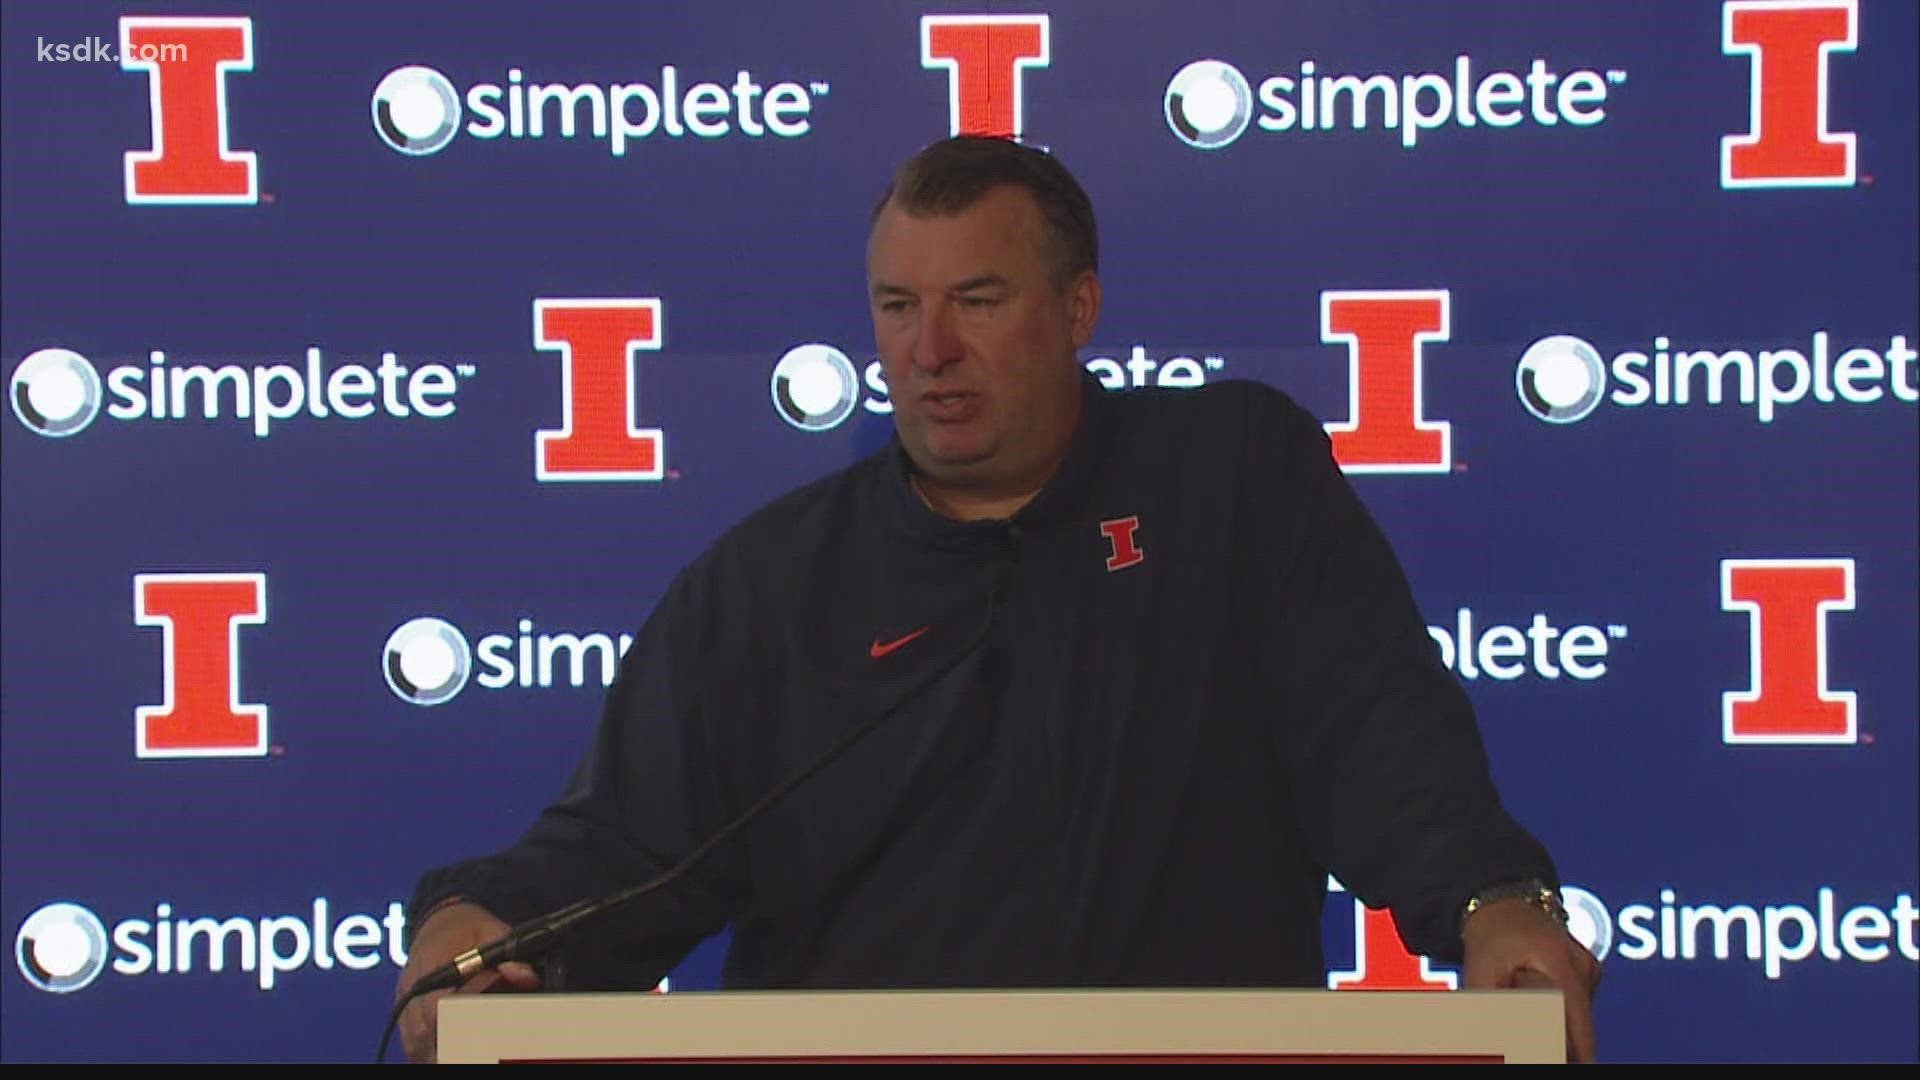 Illinois coach Bret Bielema has tested positive for COVID-19 and will miss his team's game at No. 18 Iowa. Bielema said he tested positive Monday night.